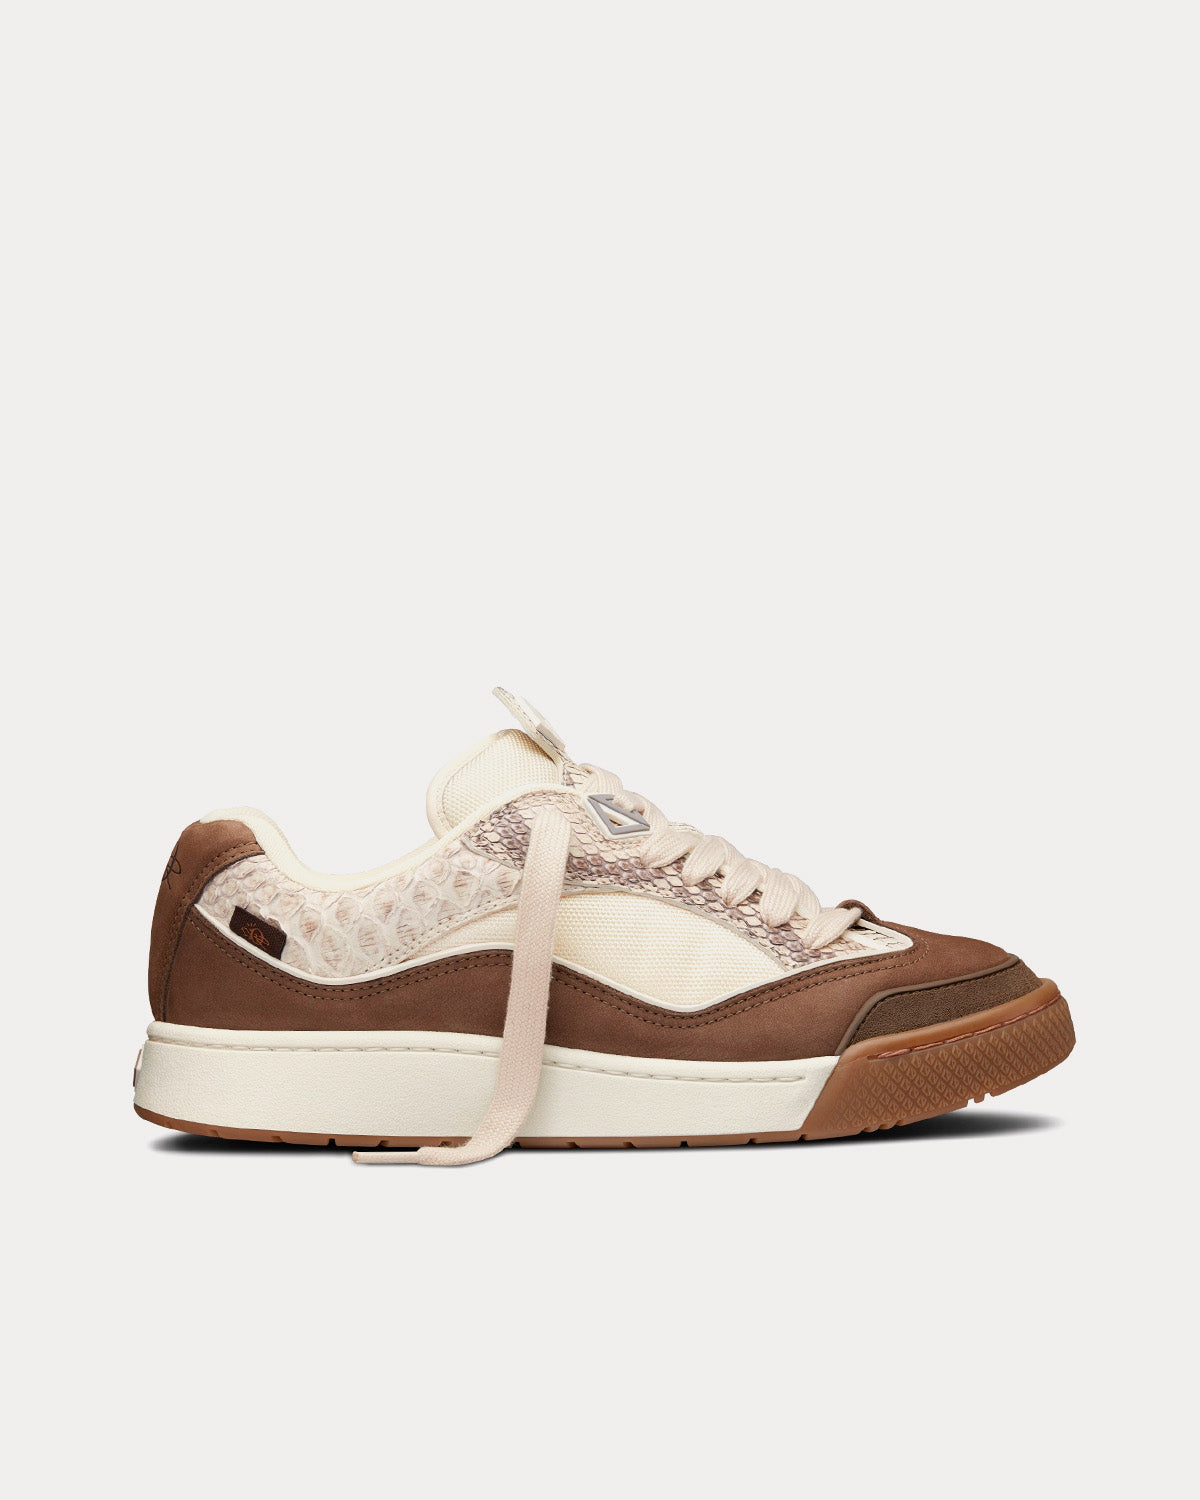 B713 'Cactus Jack' Beige Calfskin Leather with Brown Nubuck and Python Low  Top Sneakers